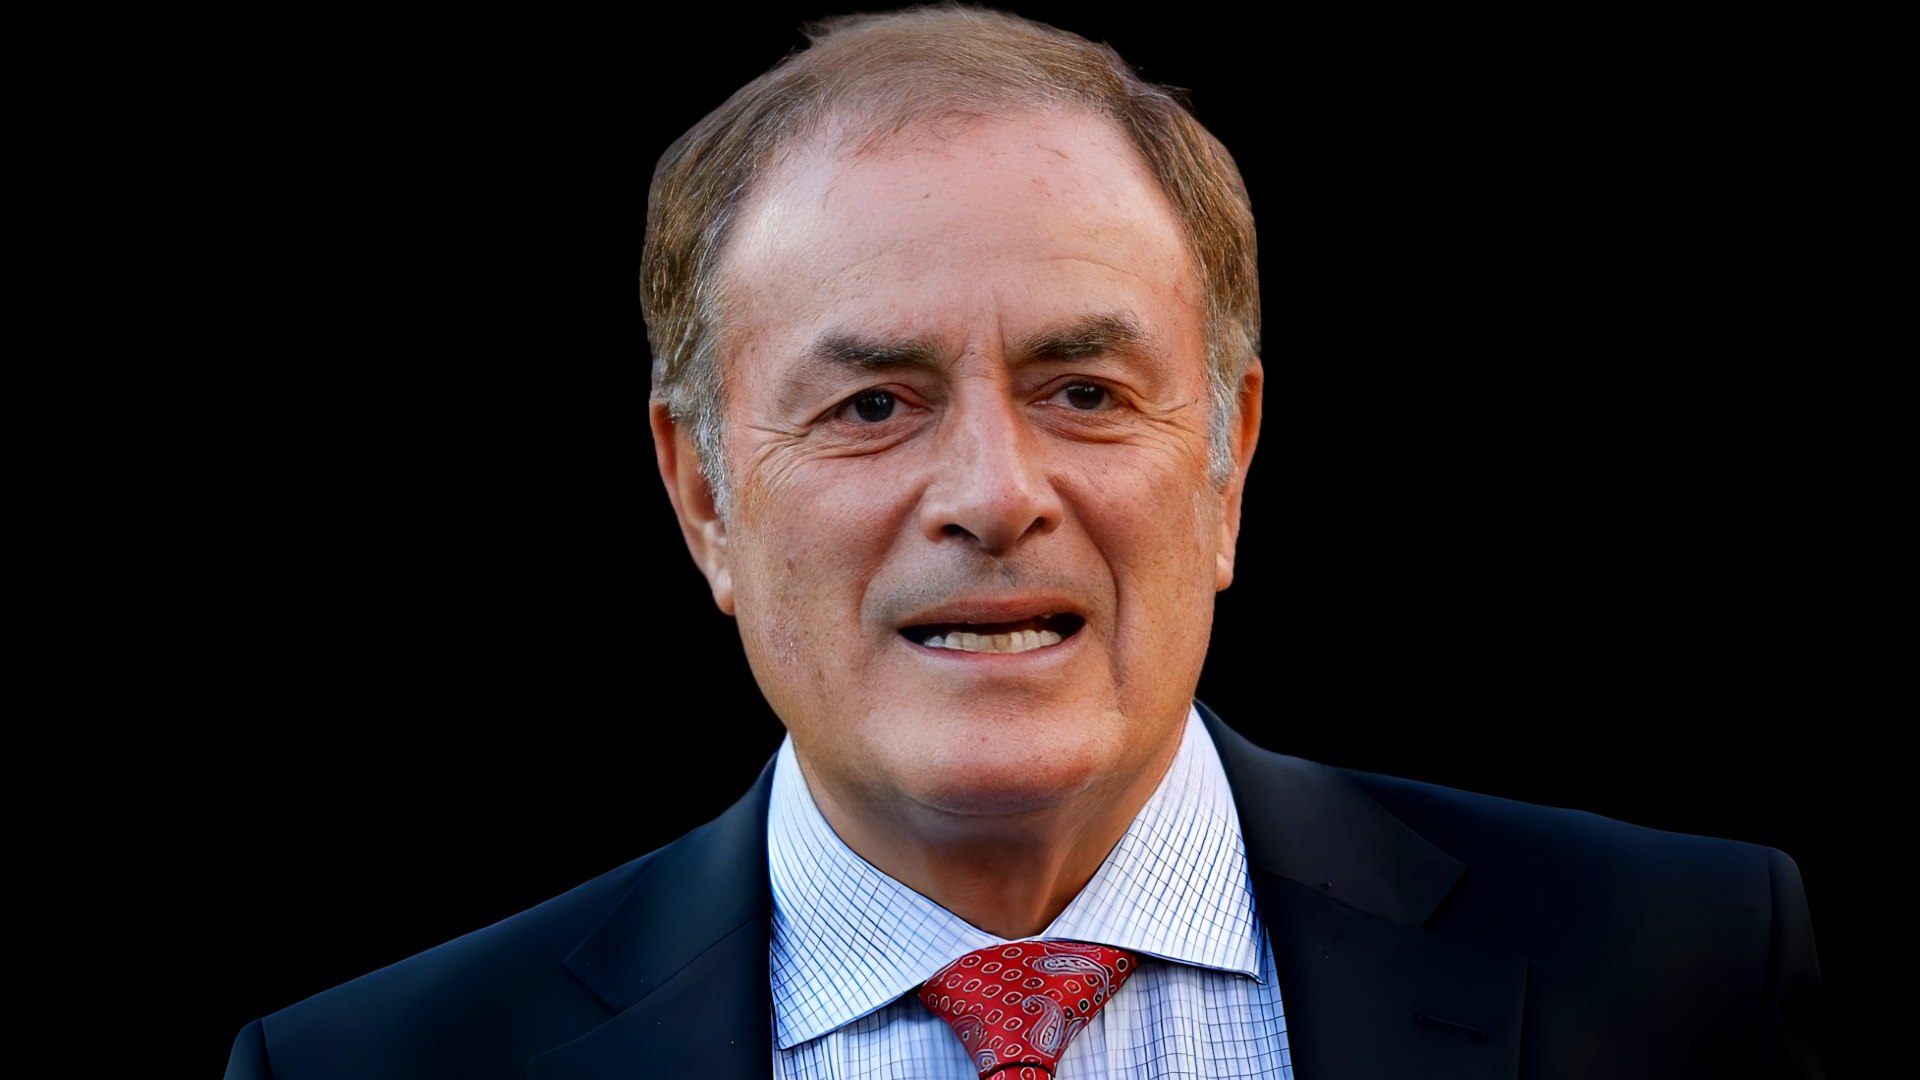 Al Michaels  Biography, Miracle on Ice, Monday Night Football